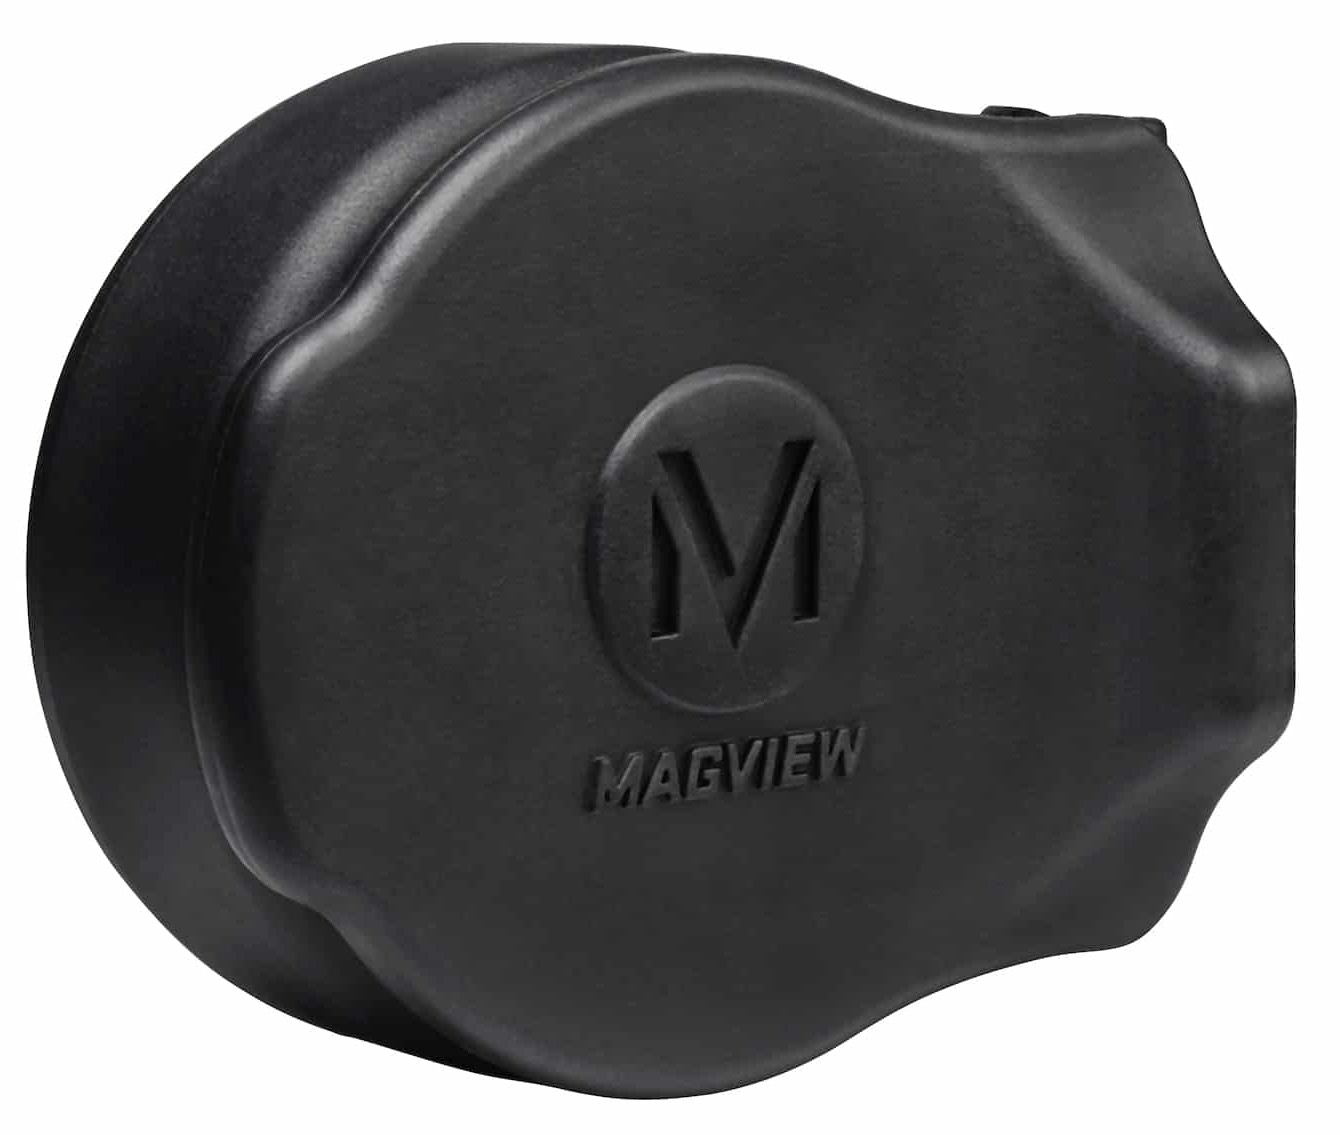 MAGVIEW S1 SPOTTING SCOPE ADAPTER - New at BHC